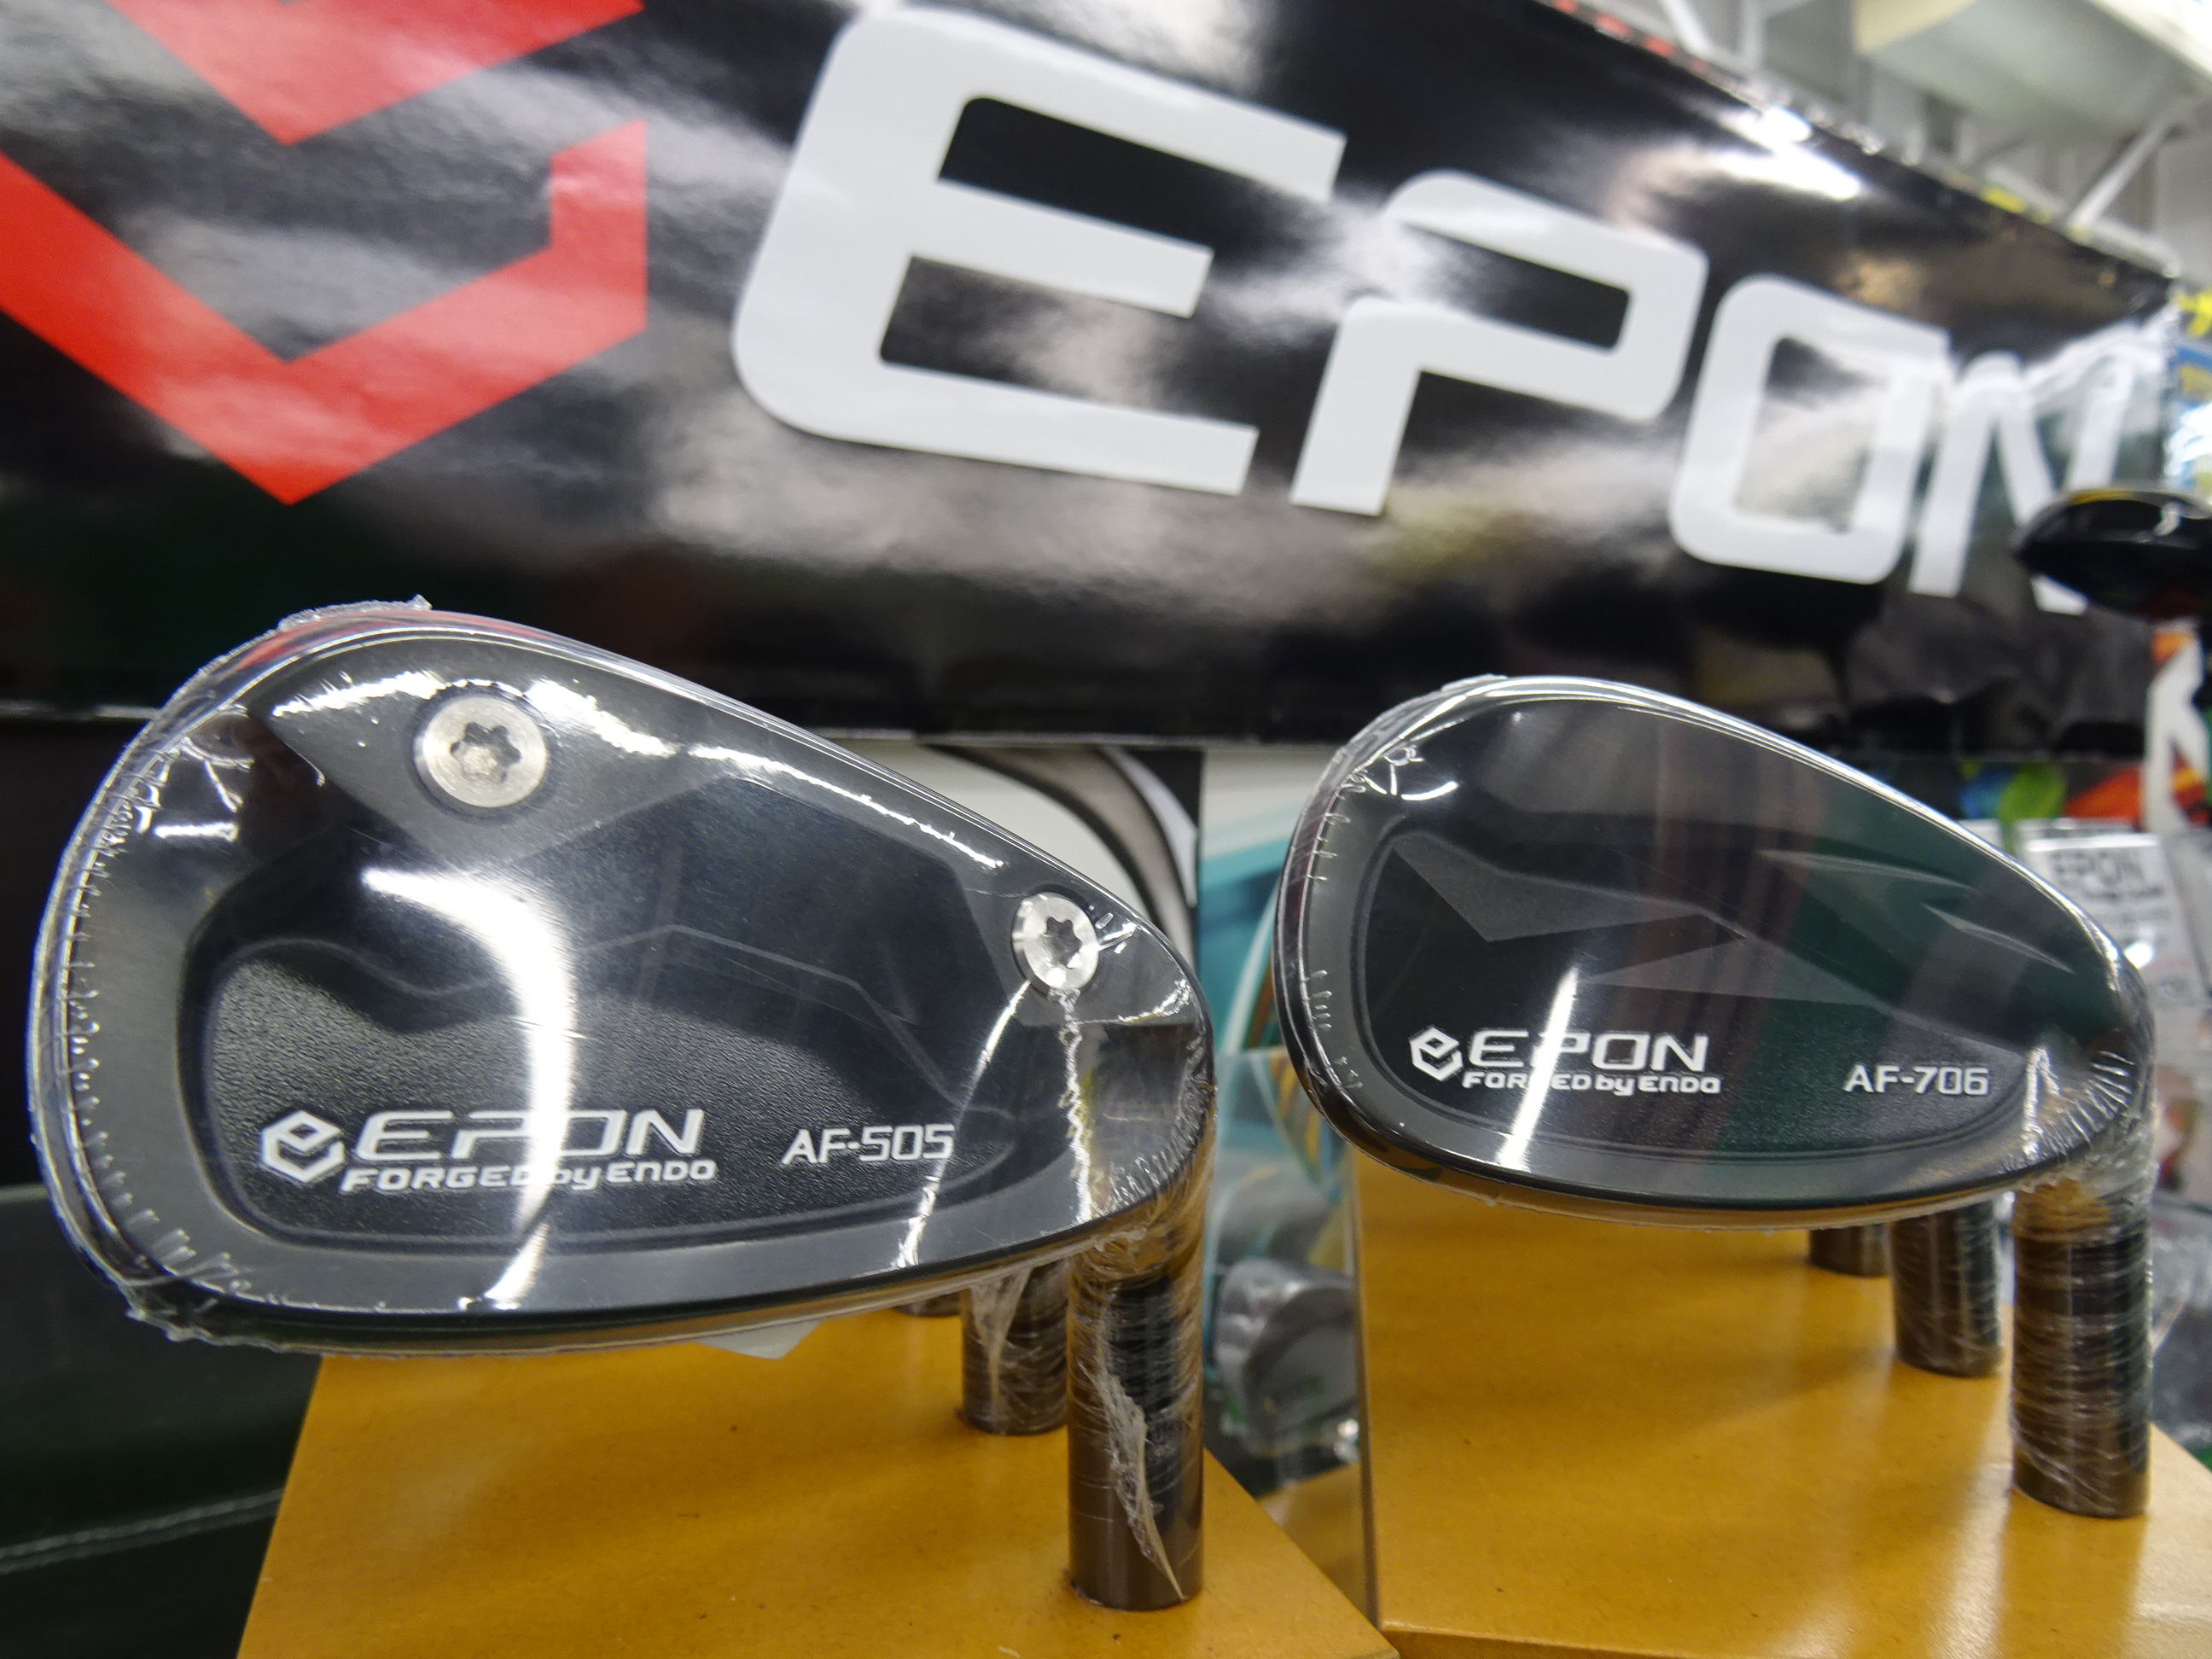 ☆EPON AF-505・AF-706限定ブラックアイアン入荷☆ - 第一ゴルフ 箕面北摂店のブログ